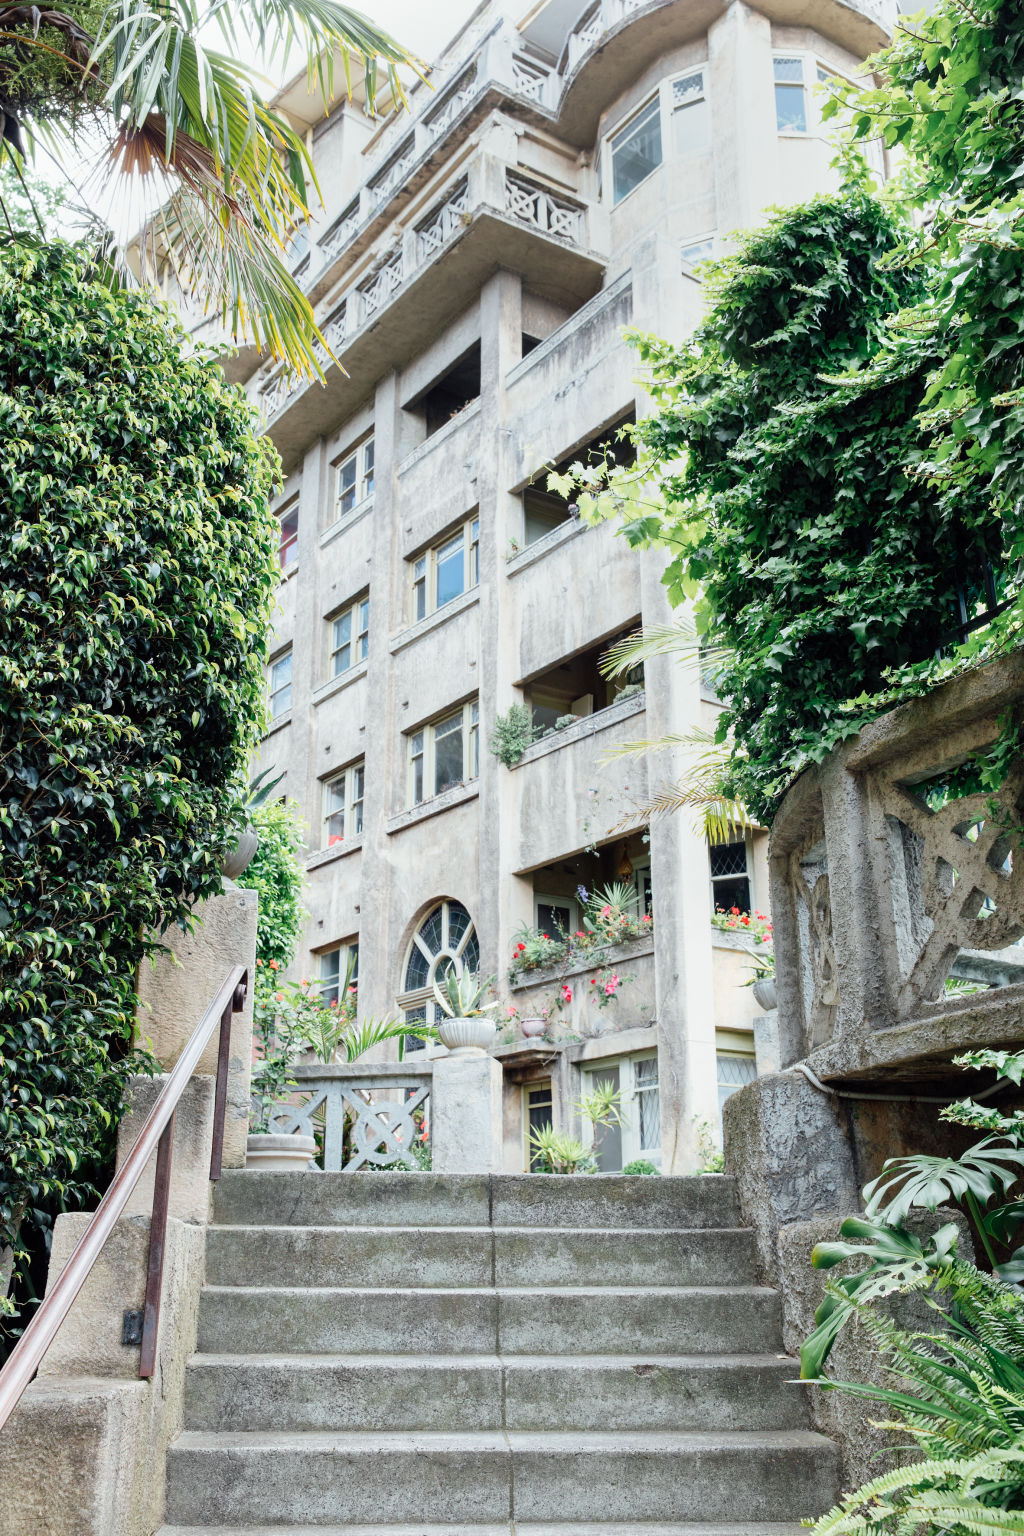 Built in 1935-1936, the Beverley Hills flats is a Spanish mission-style complex in South Yarra spanning two buildings set around a central pool with tropical landscaping. Photo: Emma Byrnes